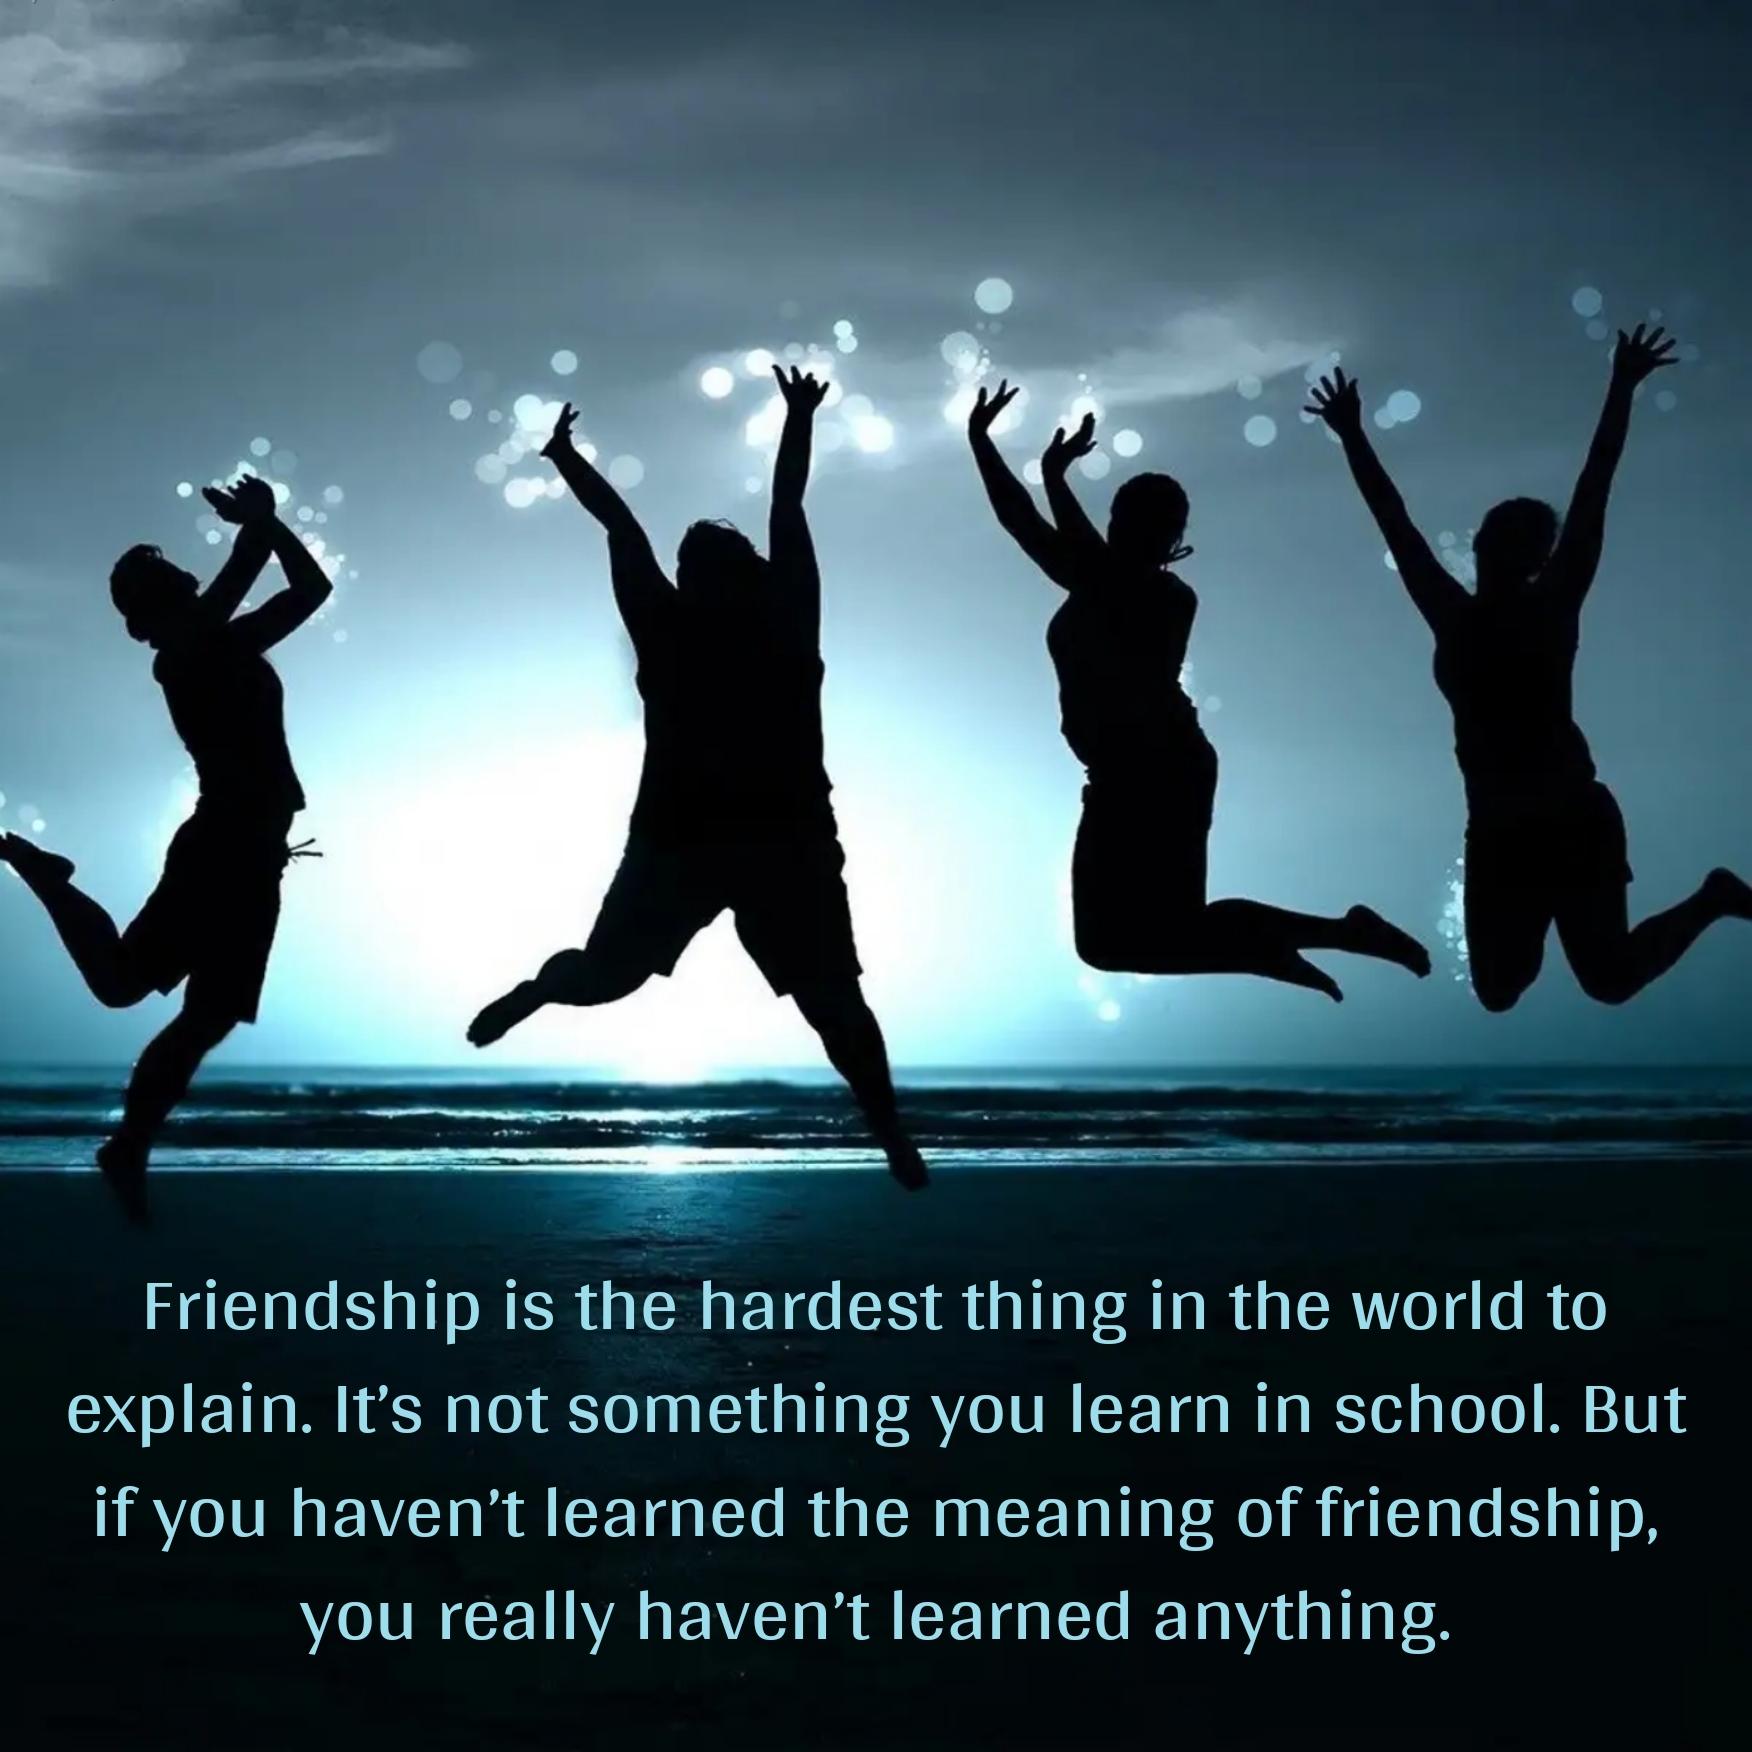 Friendship is the hardest thing in the world to explain